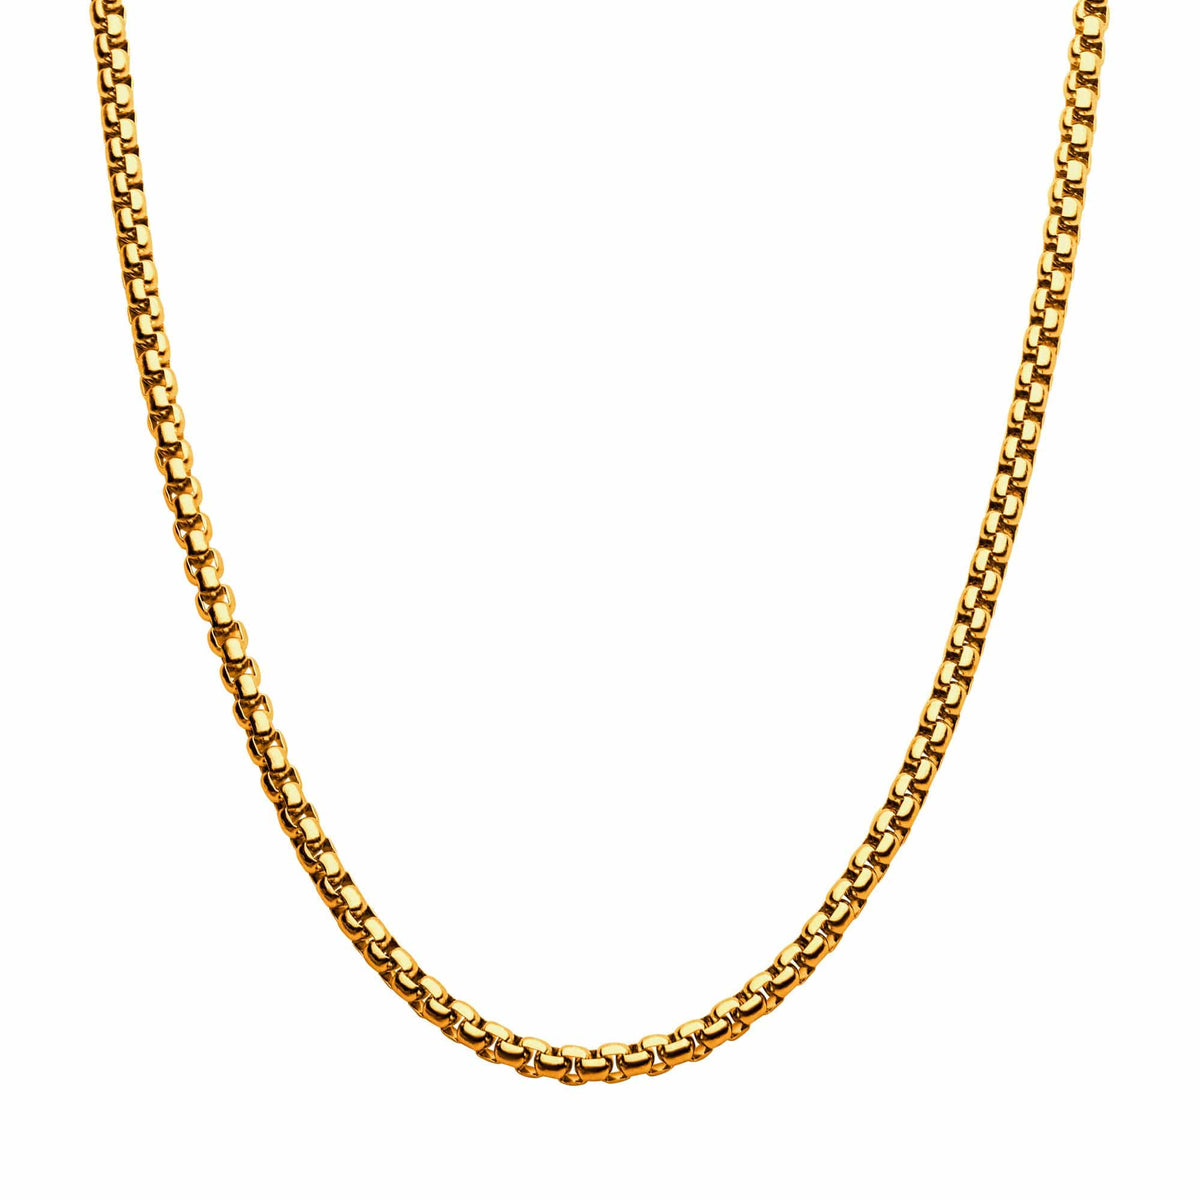 INOX JEWELRY Chains 18K Gold Ion Plated Stainless Steel 4mm Bold Box Chain